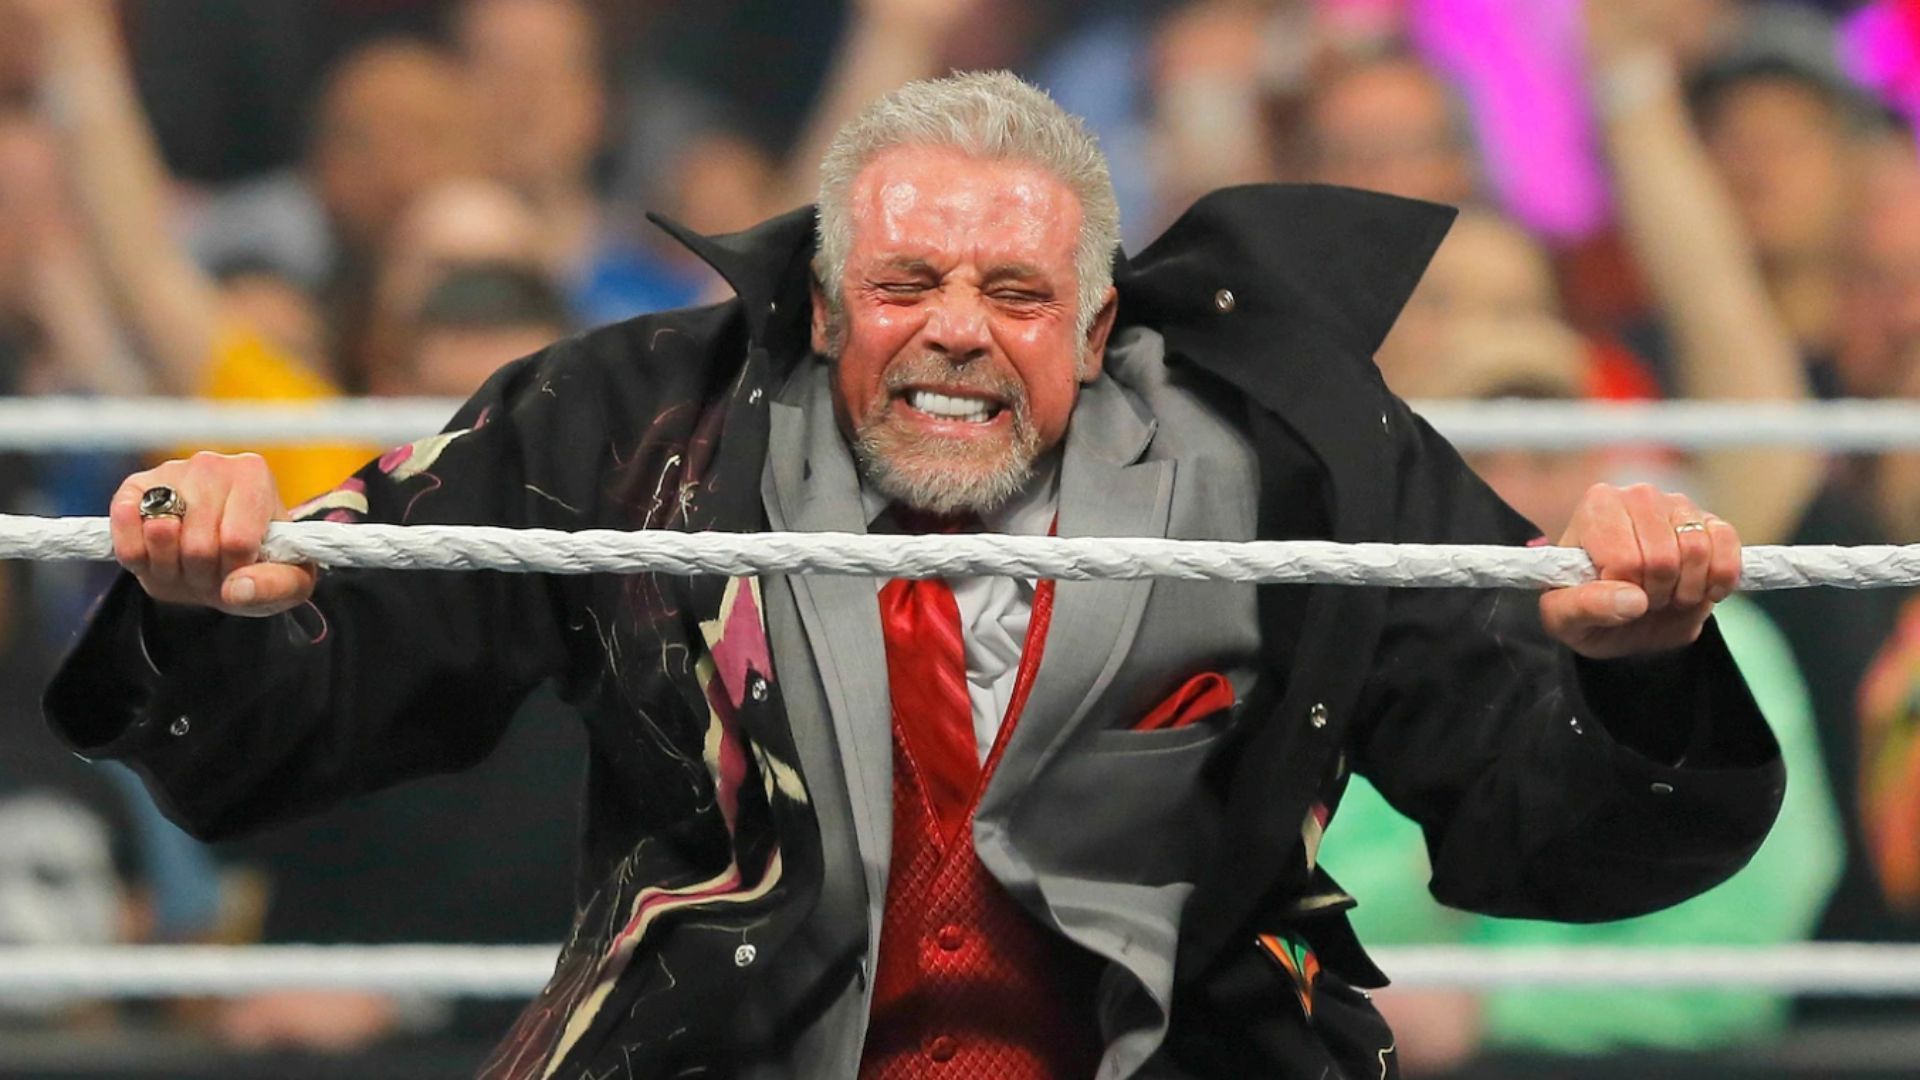 The Ultimate Warrior posing in the ring during a WWE appearance